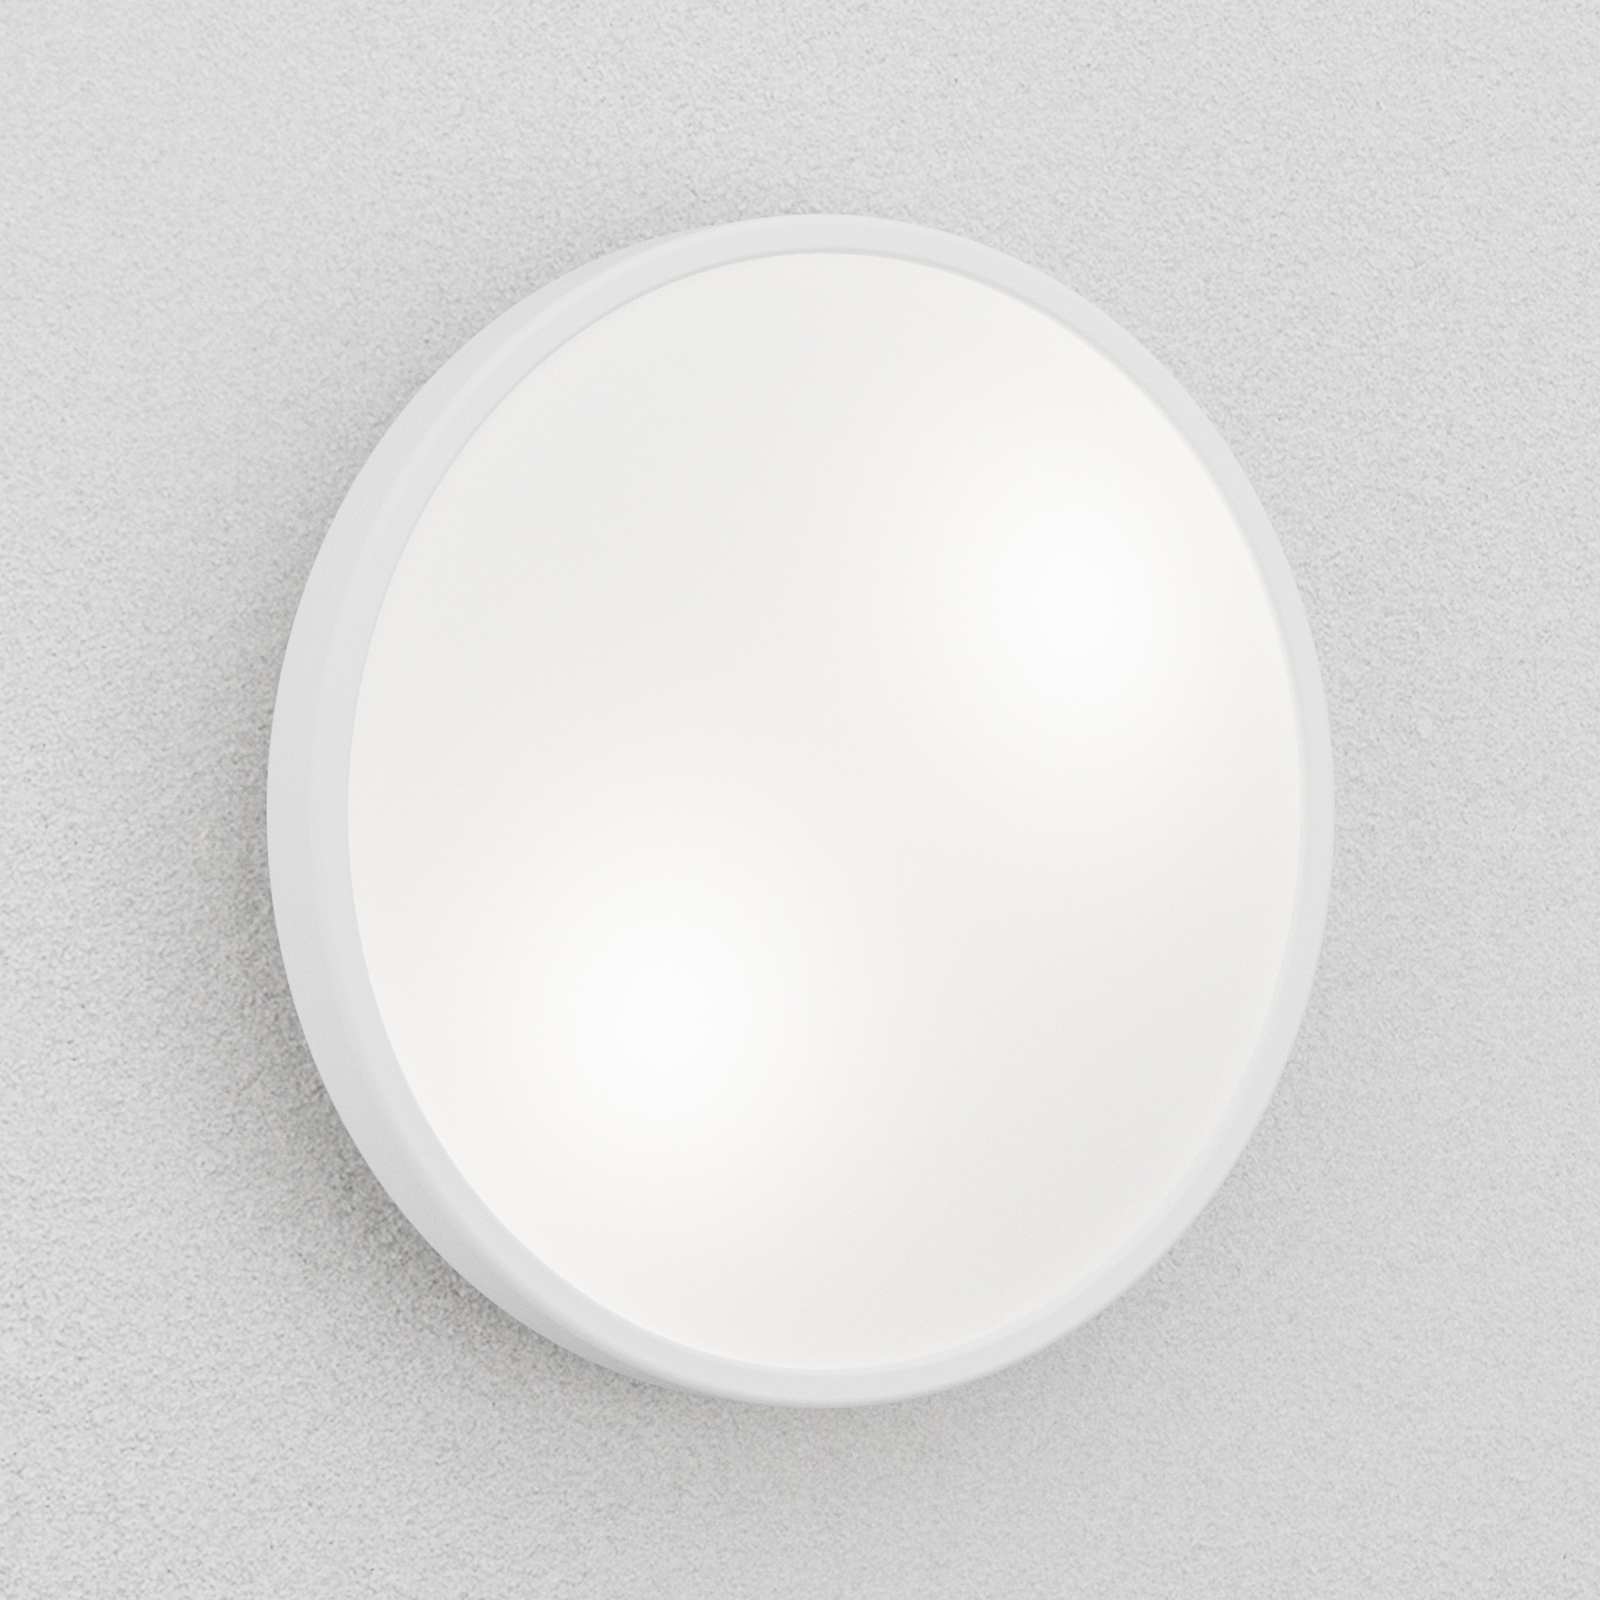 Ceiling and wall light Plaza 31 cm white